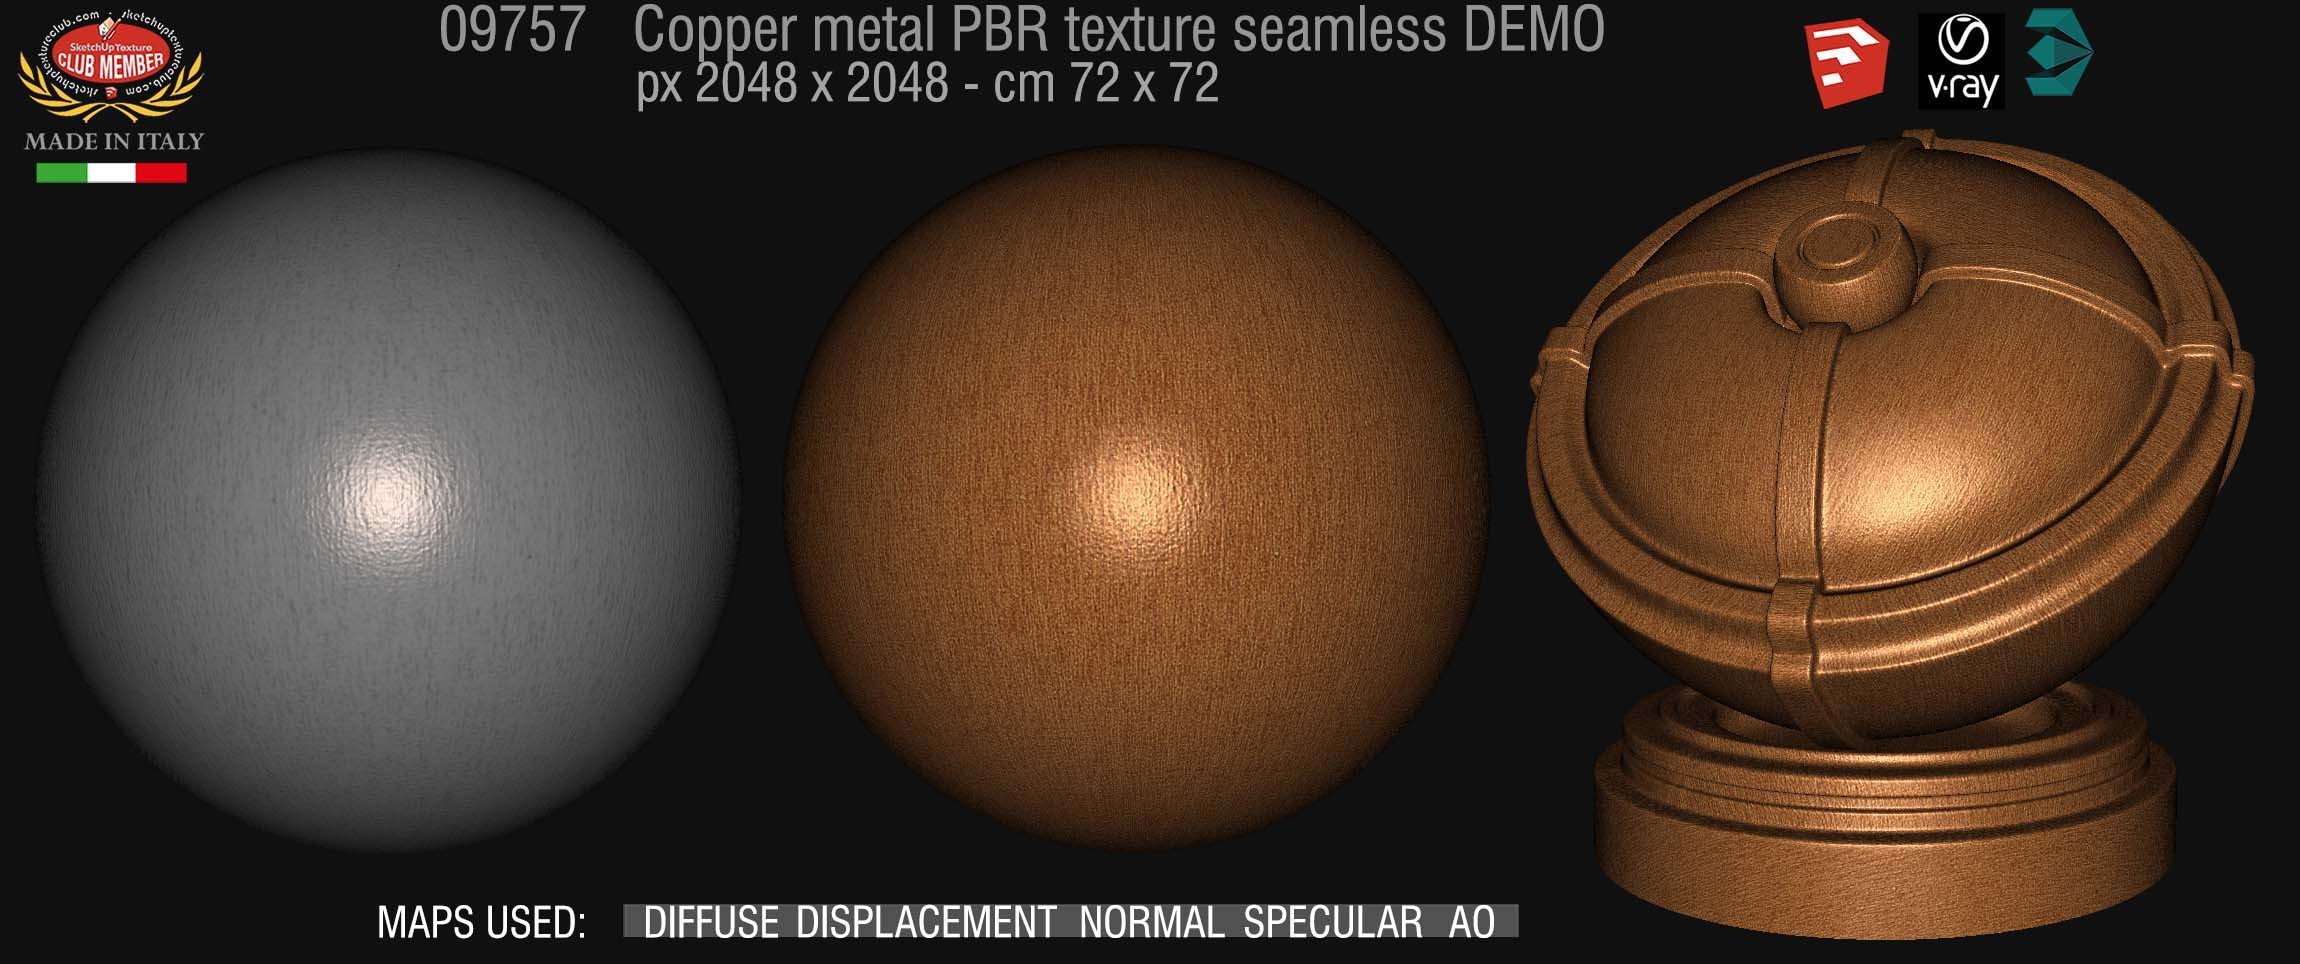 09757 Brushed copper metal PBR texture seamless DEMO